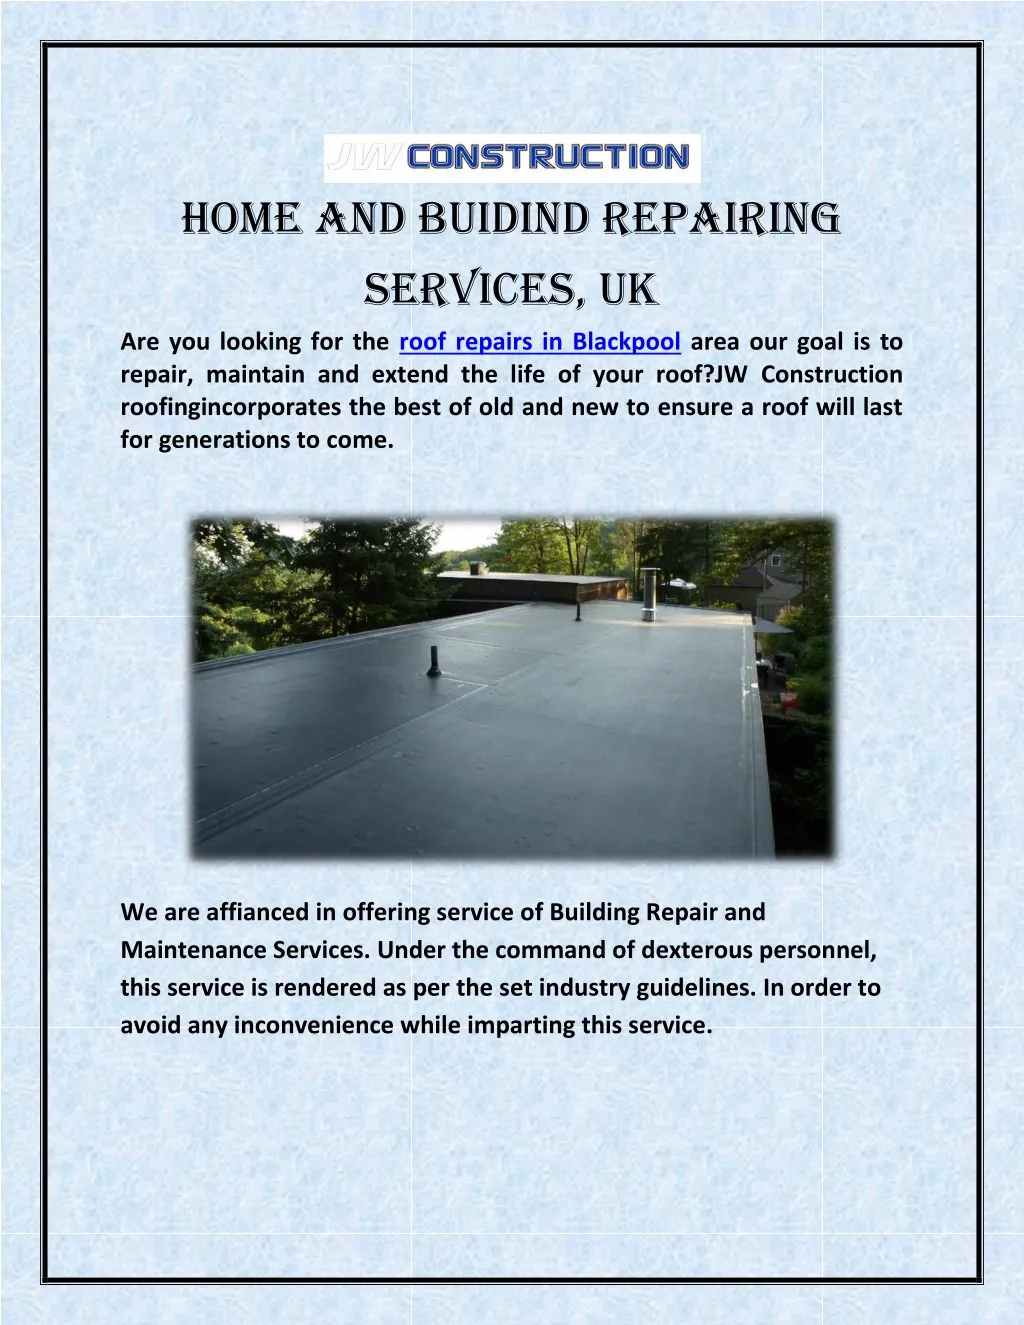 home and buidind repairing services uk